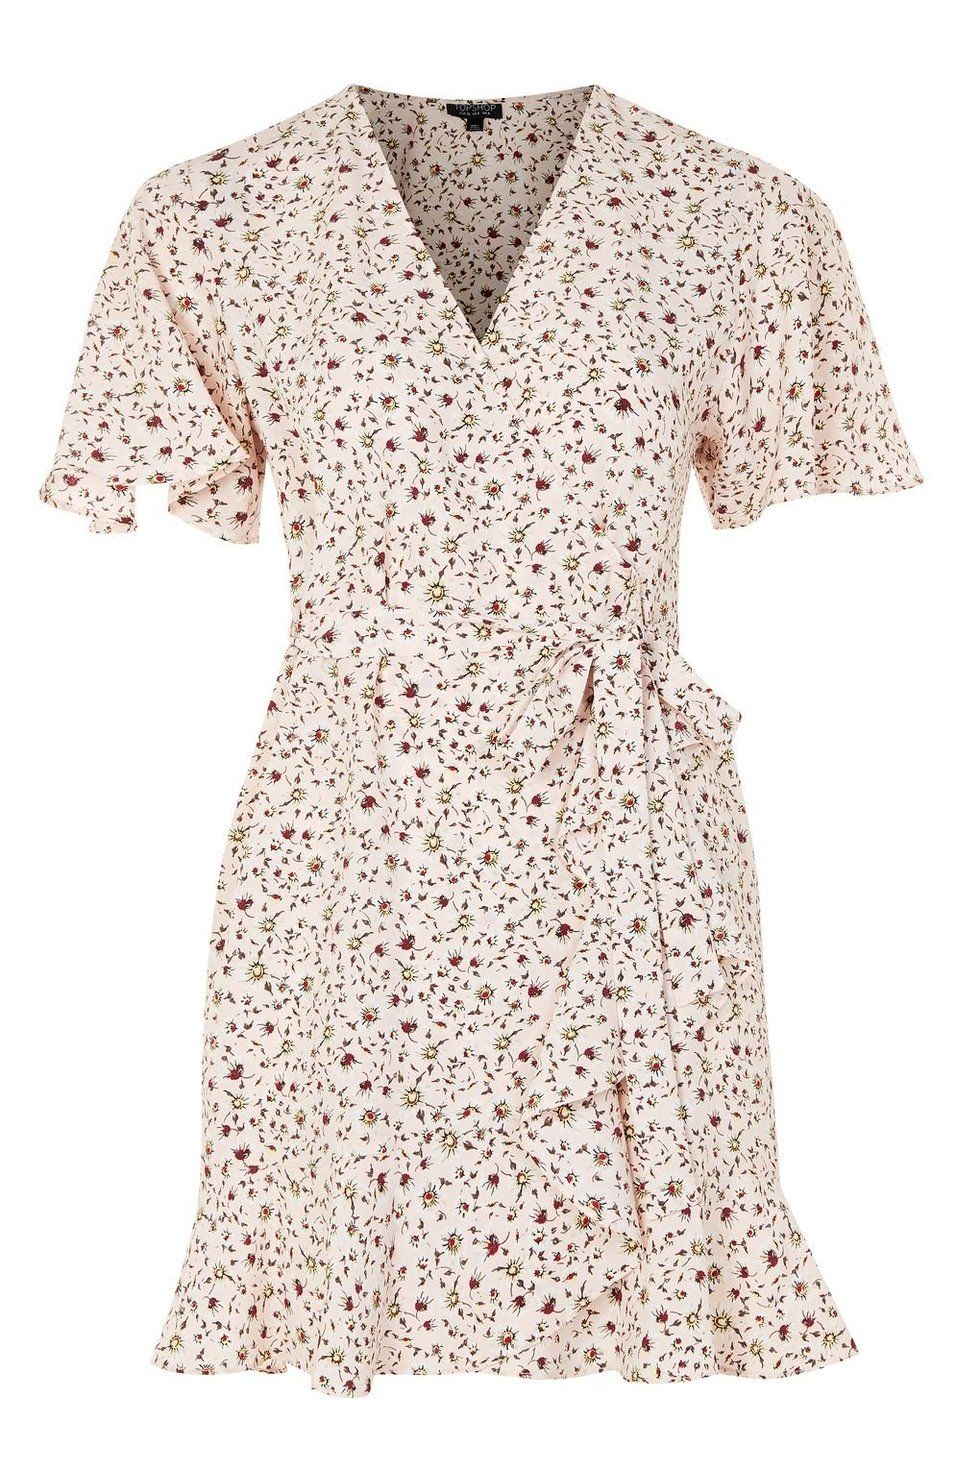 Clothing, Day dress, Dress, White, Sleeve, Pink, Cocktail dress, Neck, Beige, 